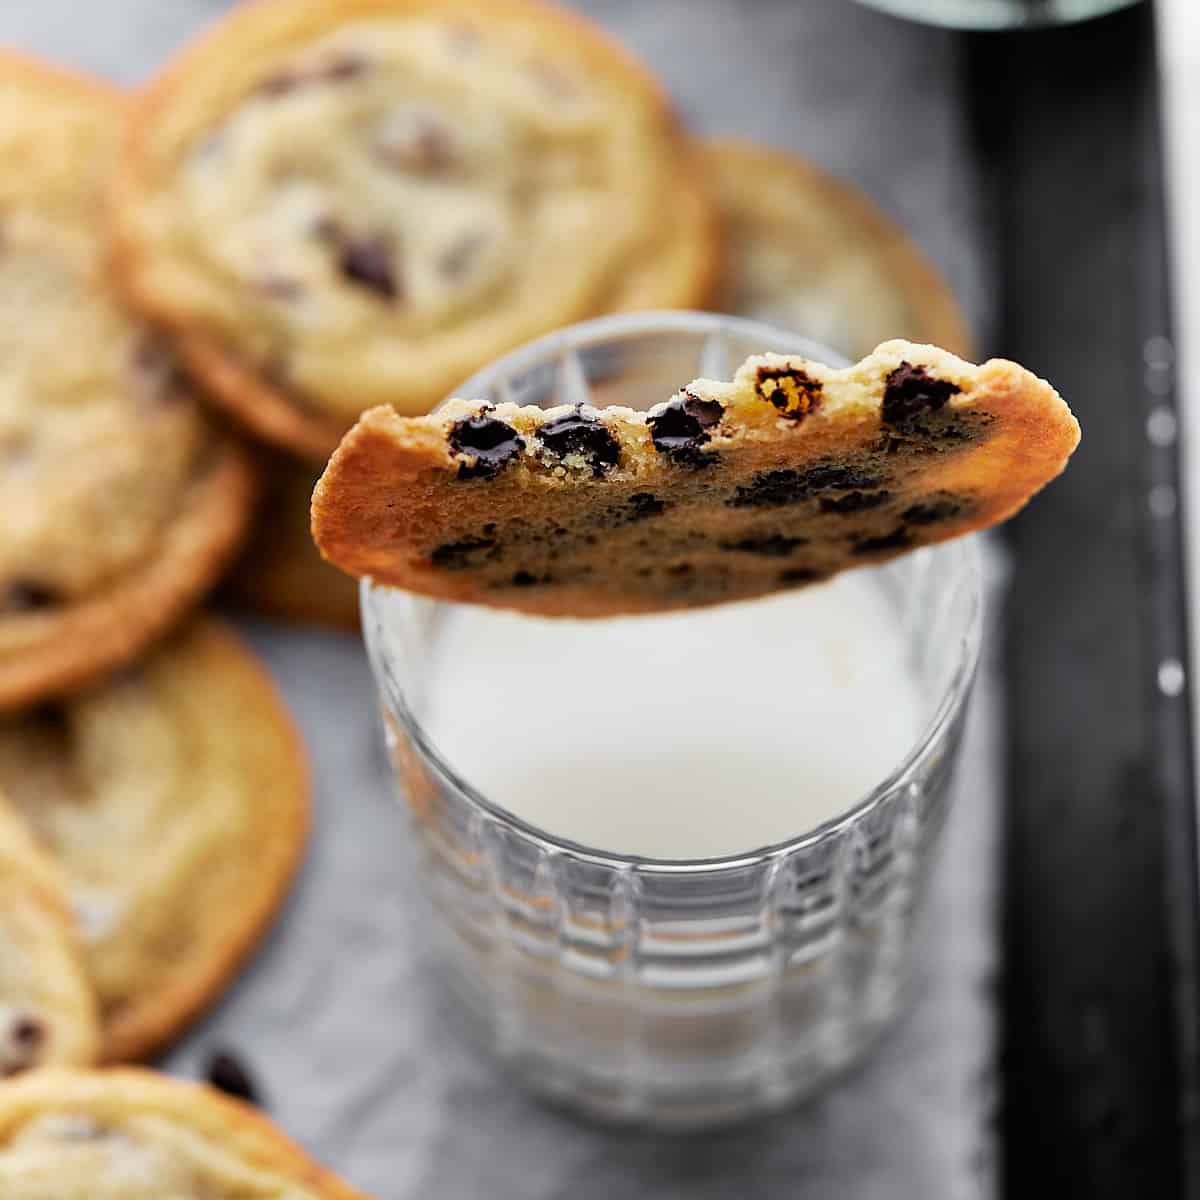 Bitten cookie placed on top of a glass of milk surrounded by other cookies